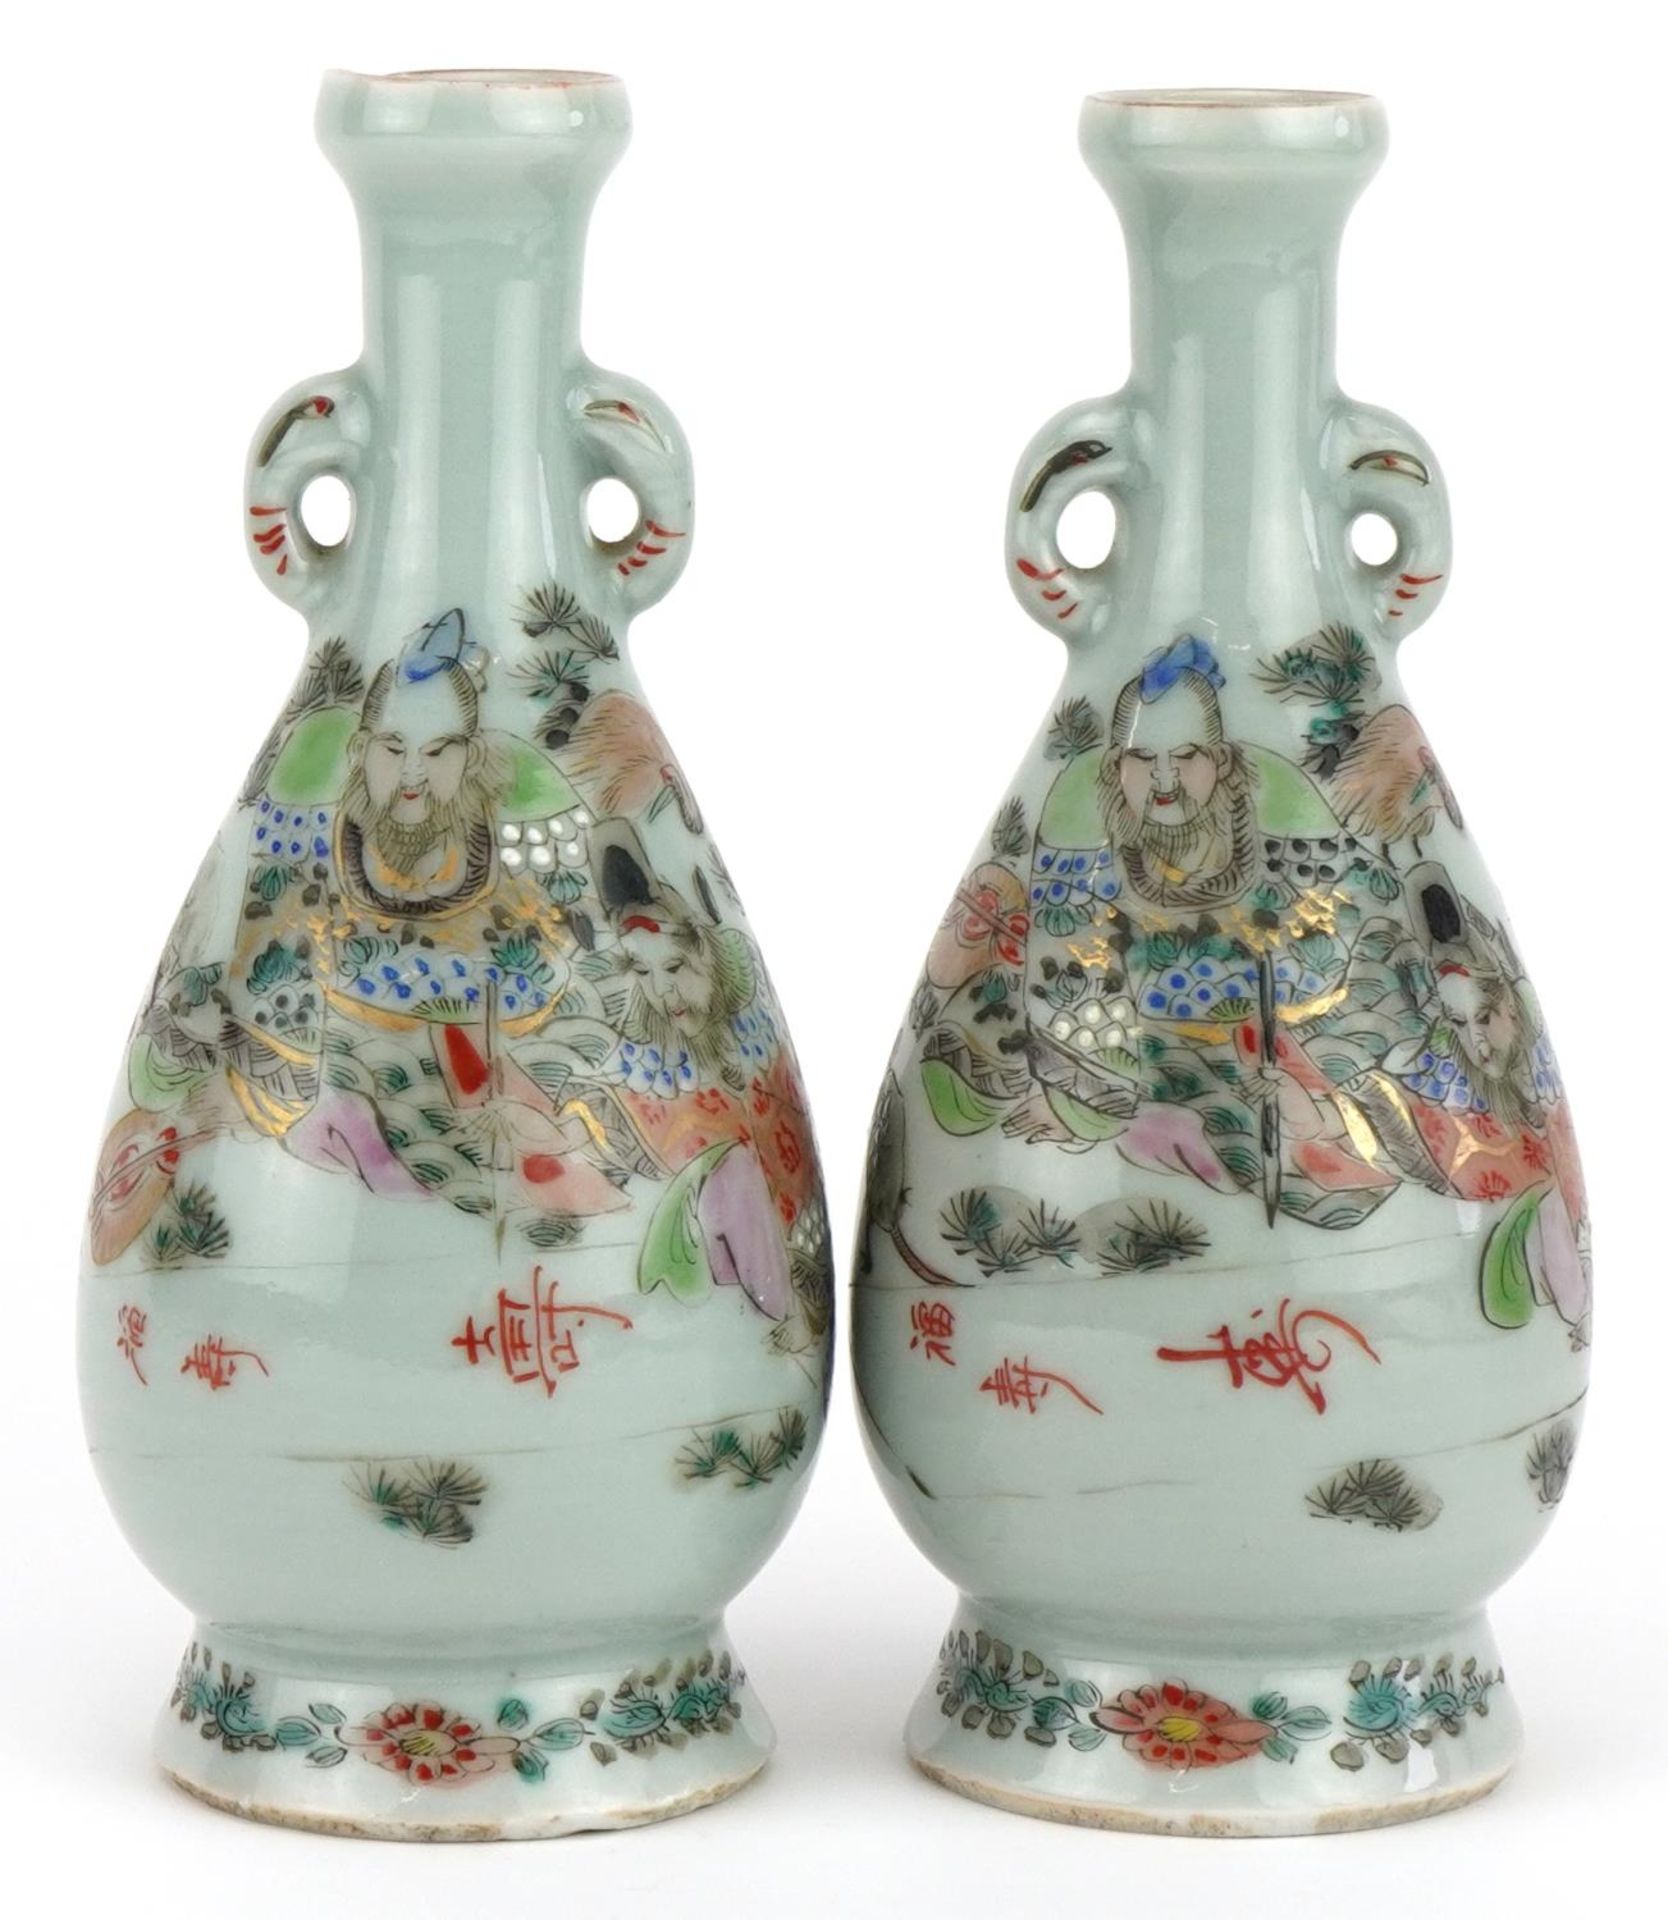 Pair of Japanese porcelain vases hand painted with a father and children, signed with calligraphy